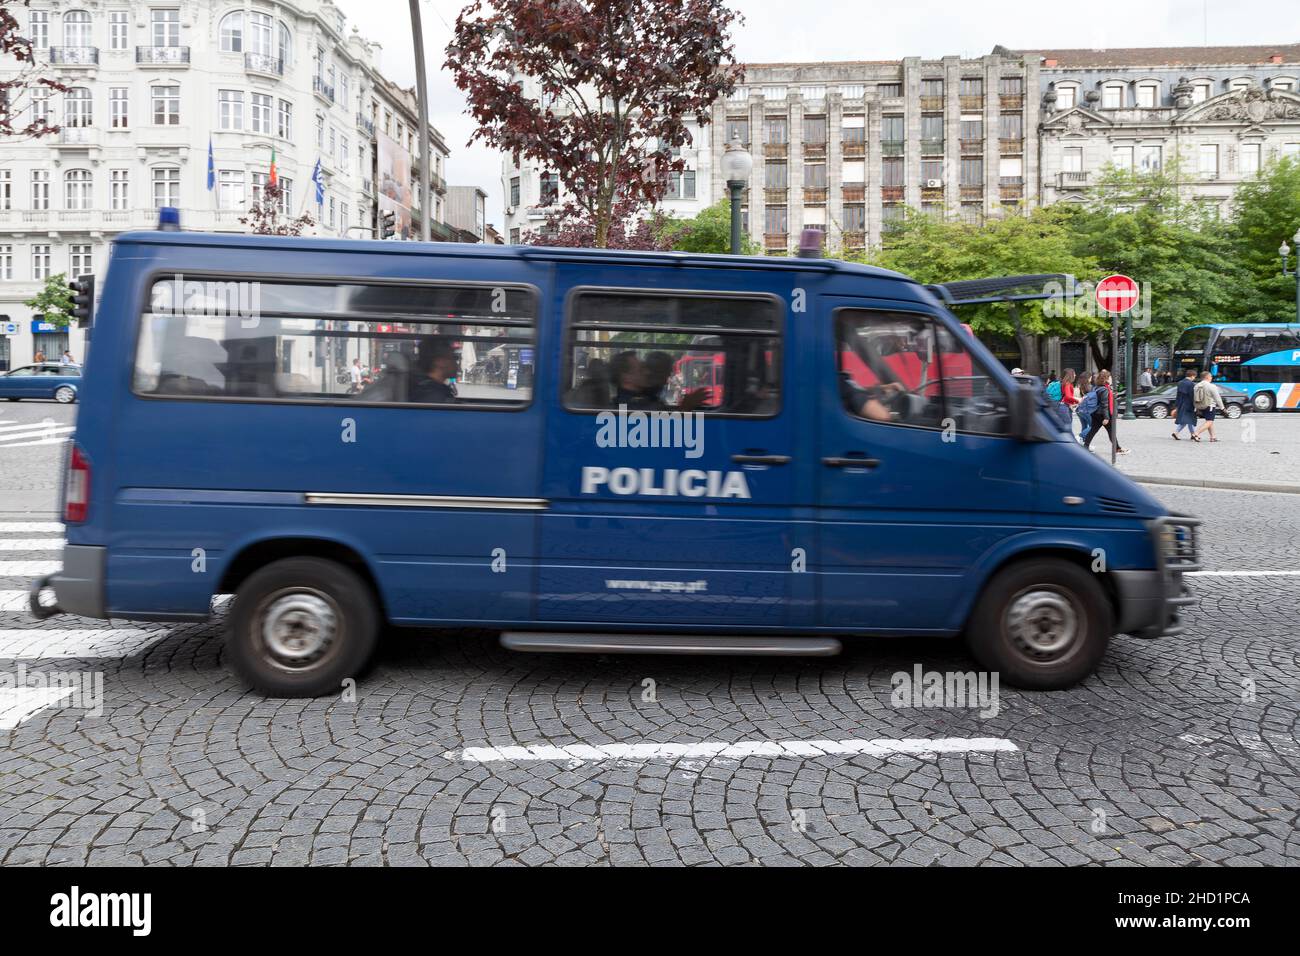 Porto, Portugal - June 03 2018: Police van during a patrol in the city center. Stock Photo